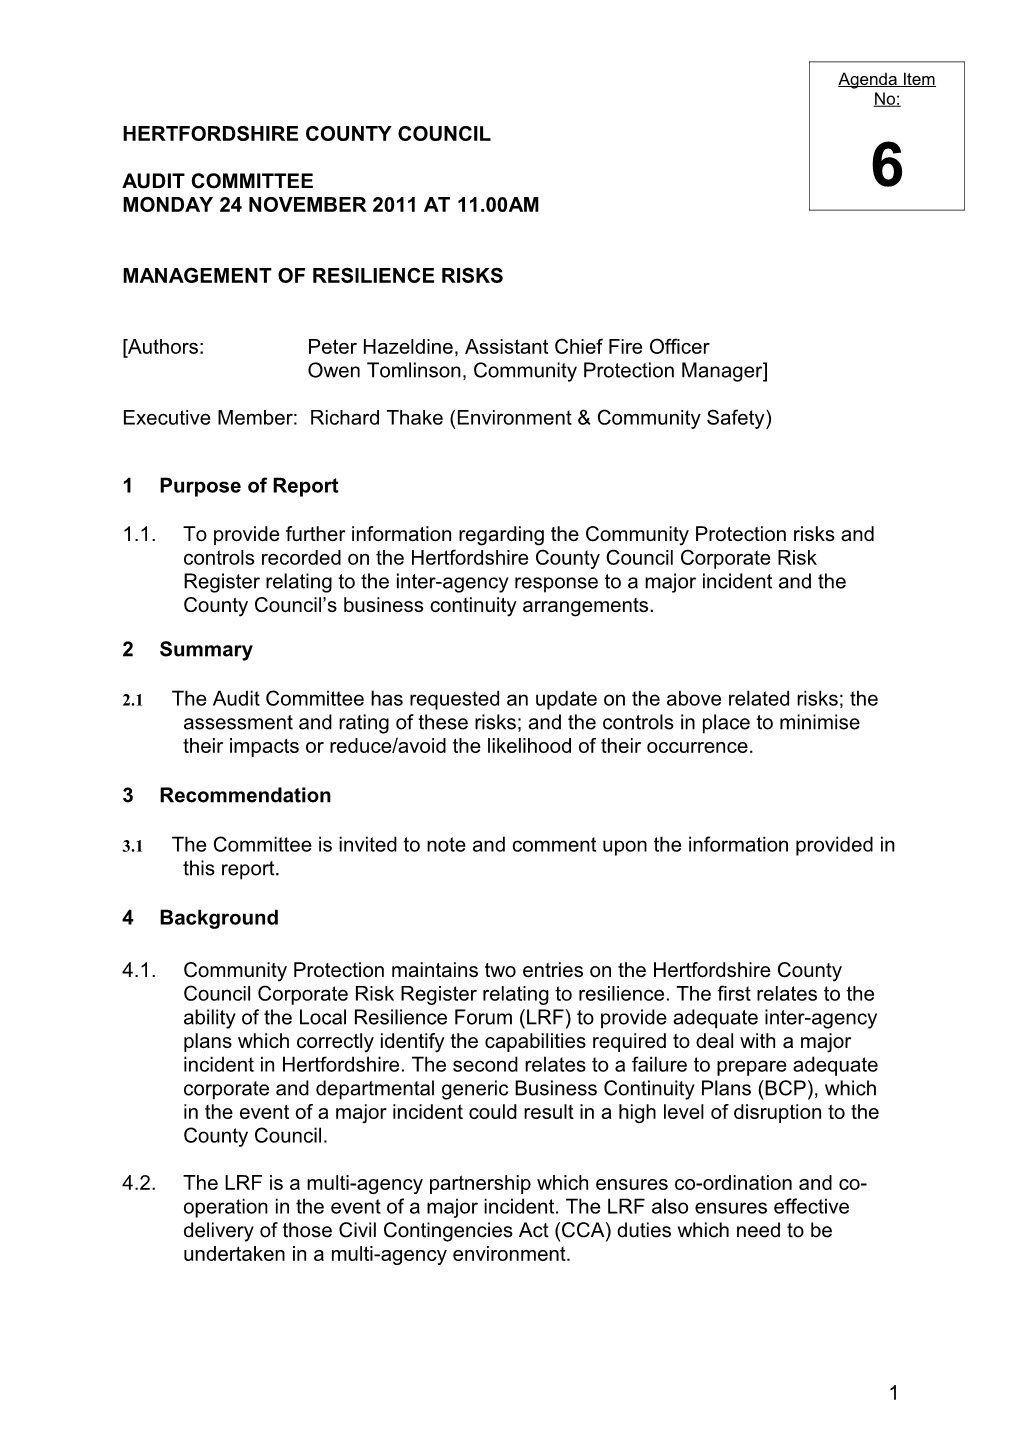 Audit Committee - Thursday 24 November 2011 at 11.00Am Item 6 - Management of Resilience Risks